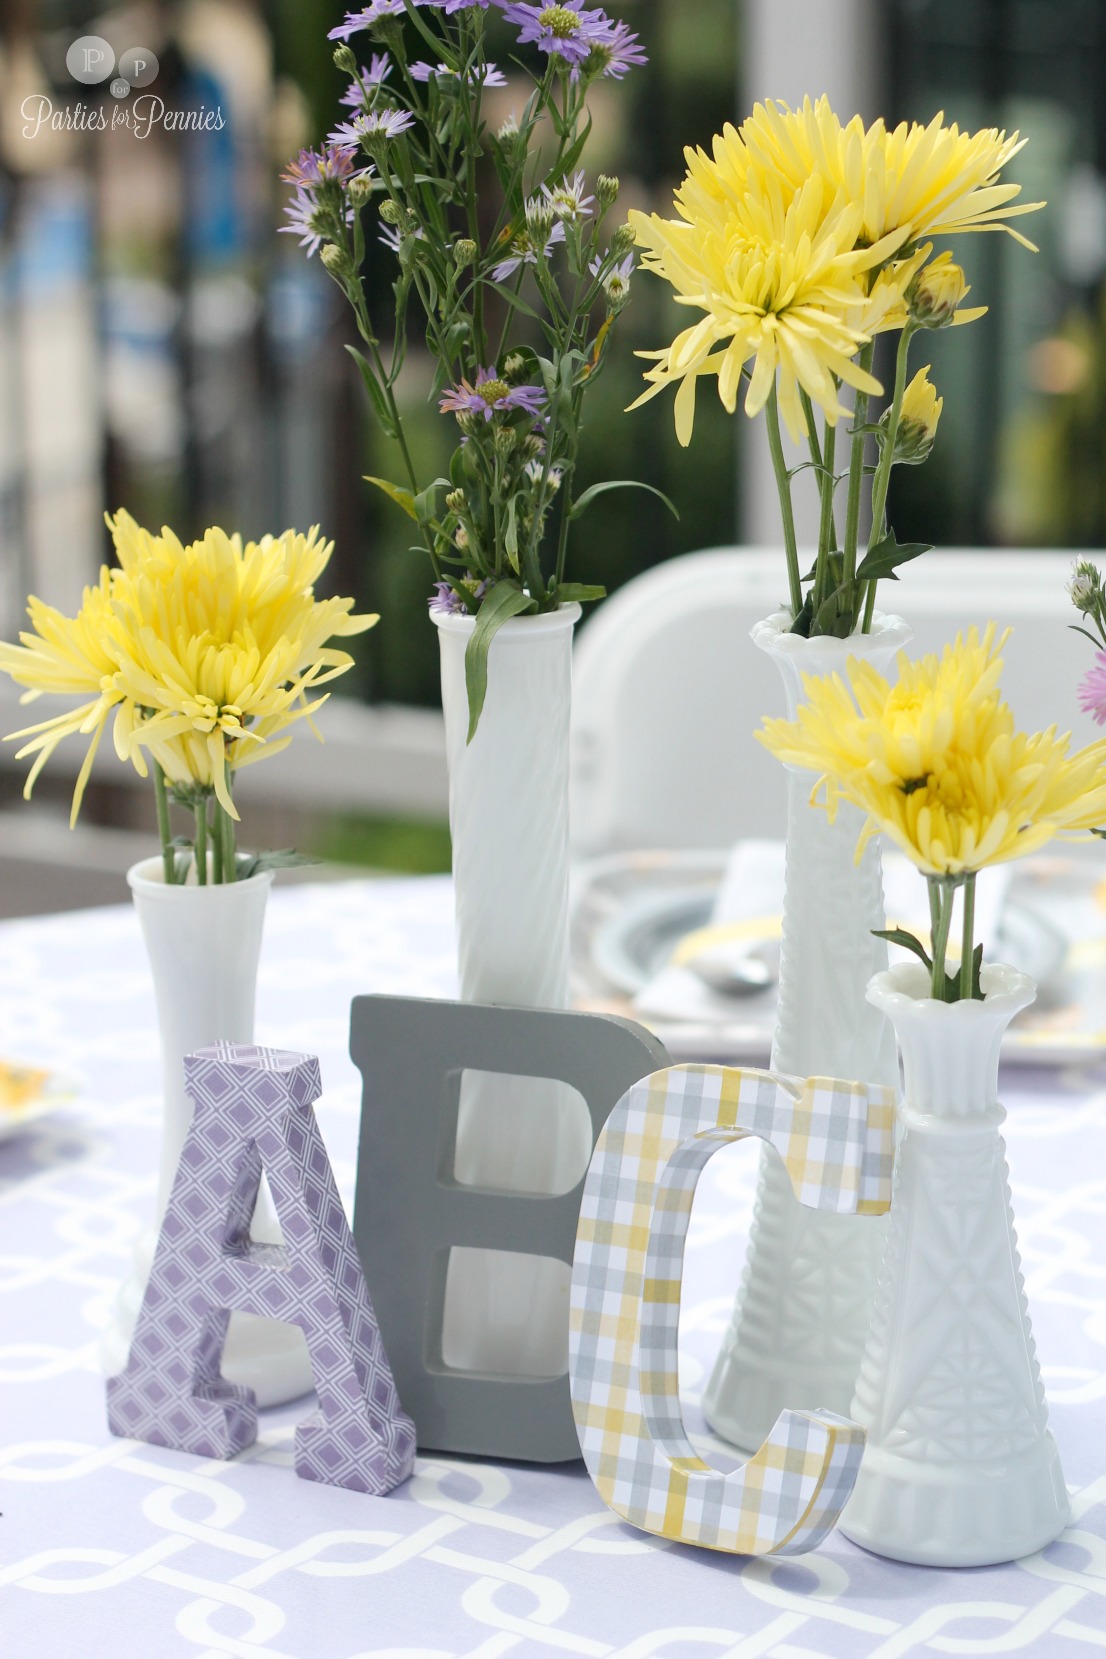 50 Ideas for Planning a Baby Shower | PartiesforPennies.com | Purple, Gray, and Yellow Baby Shower